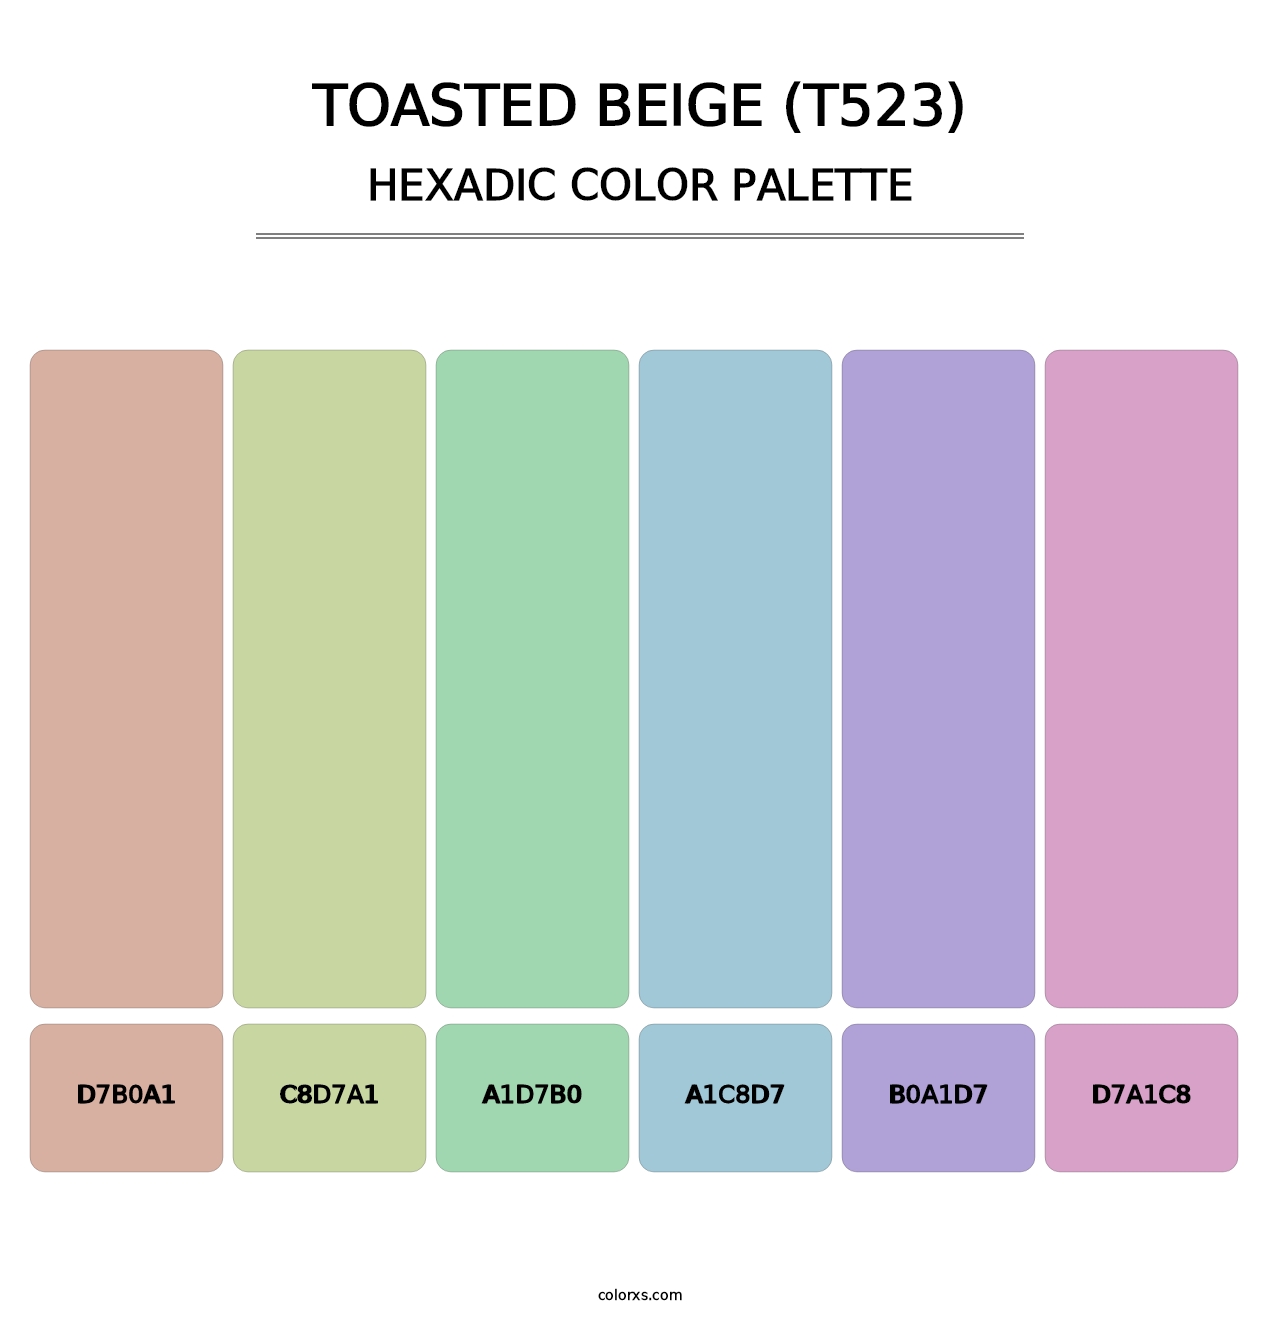 Toasted Beige (T523) - Hexadic Color Palette